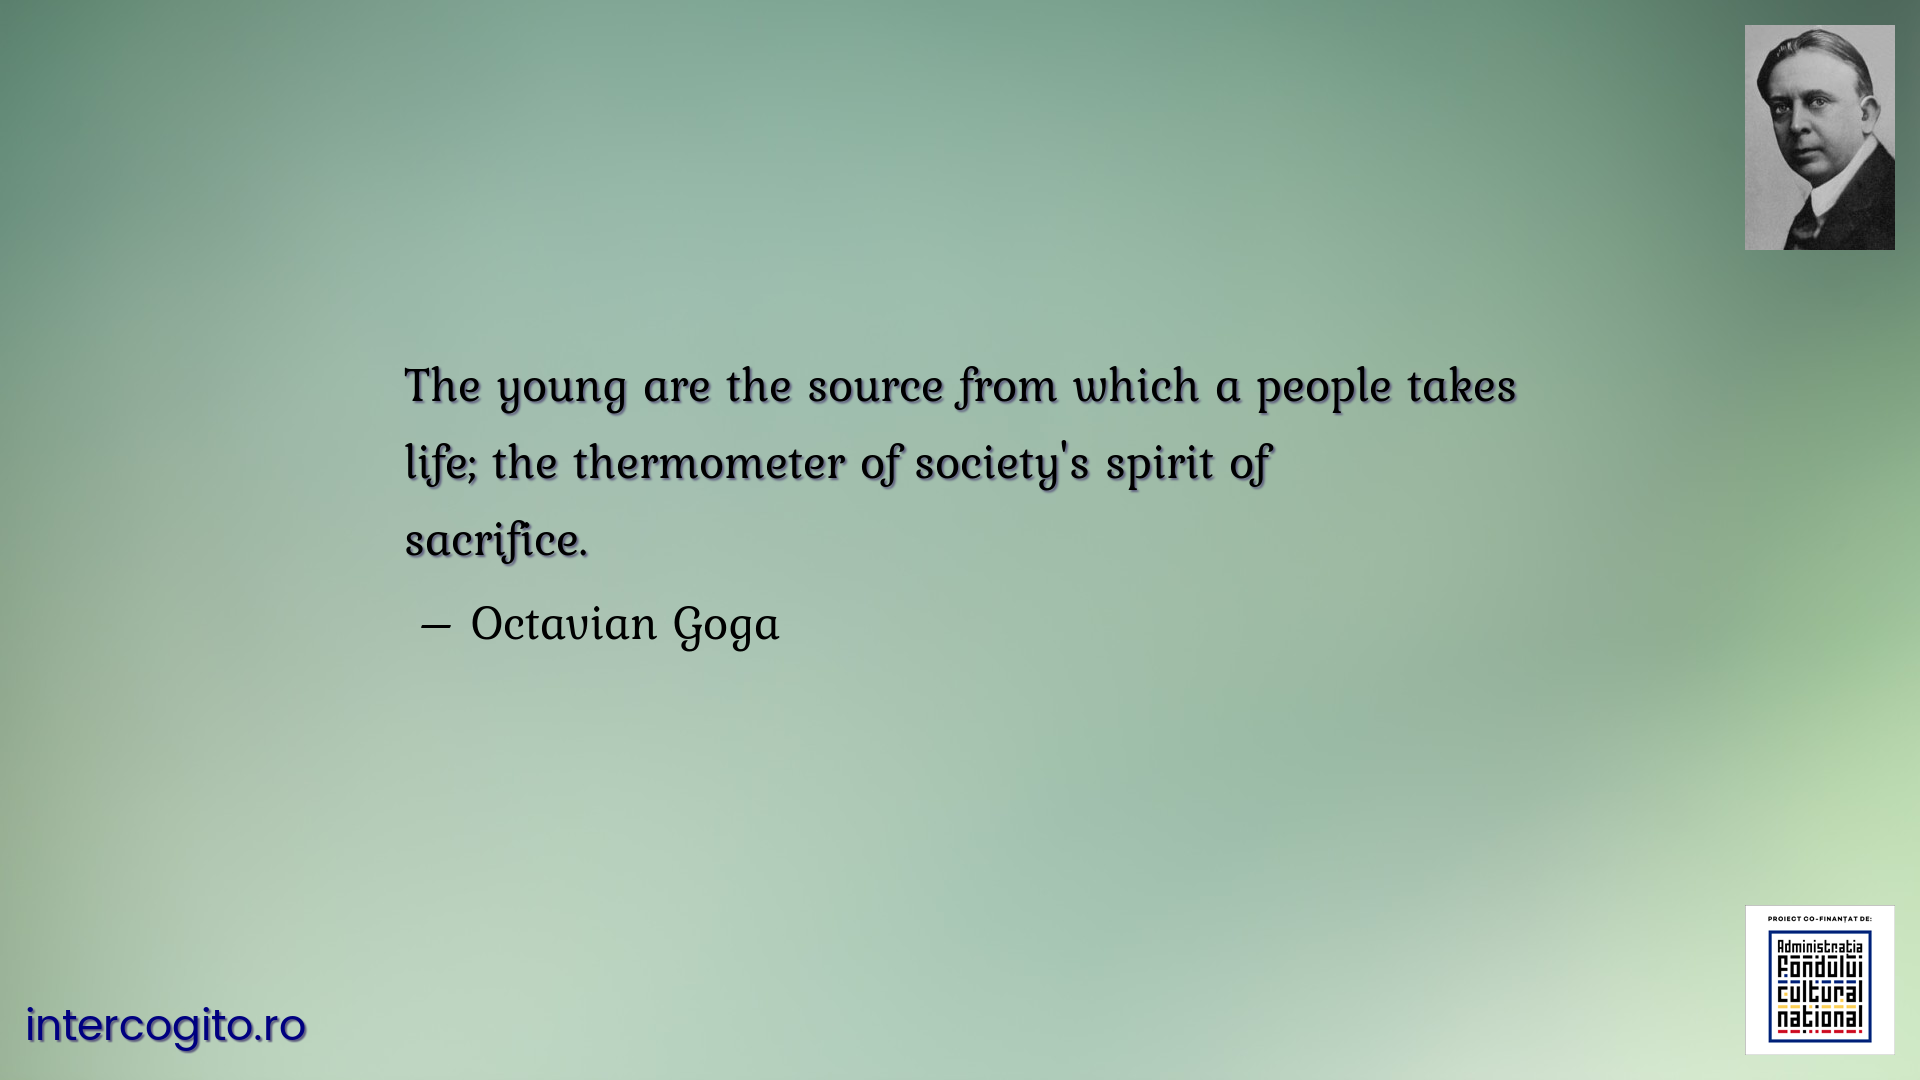 The young are the source from which a people takes life; the thermometer of society's spirit of sacrifice.